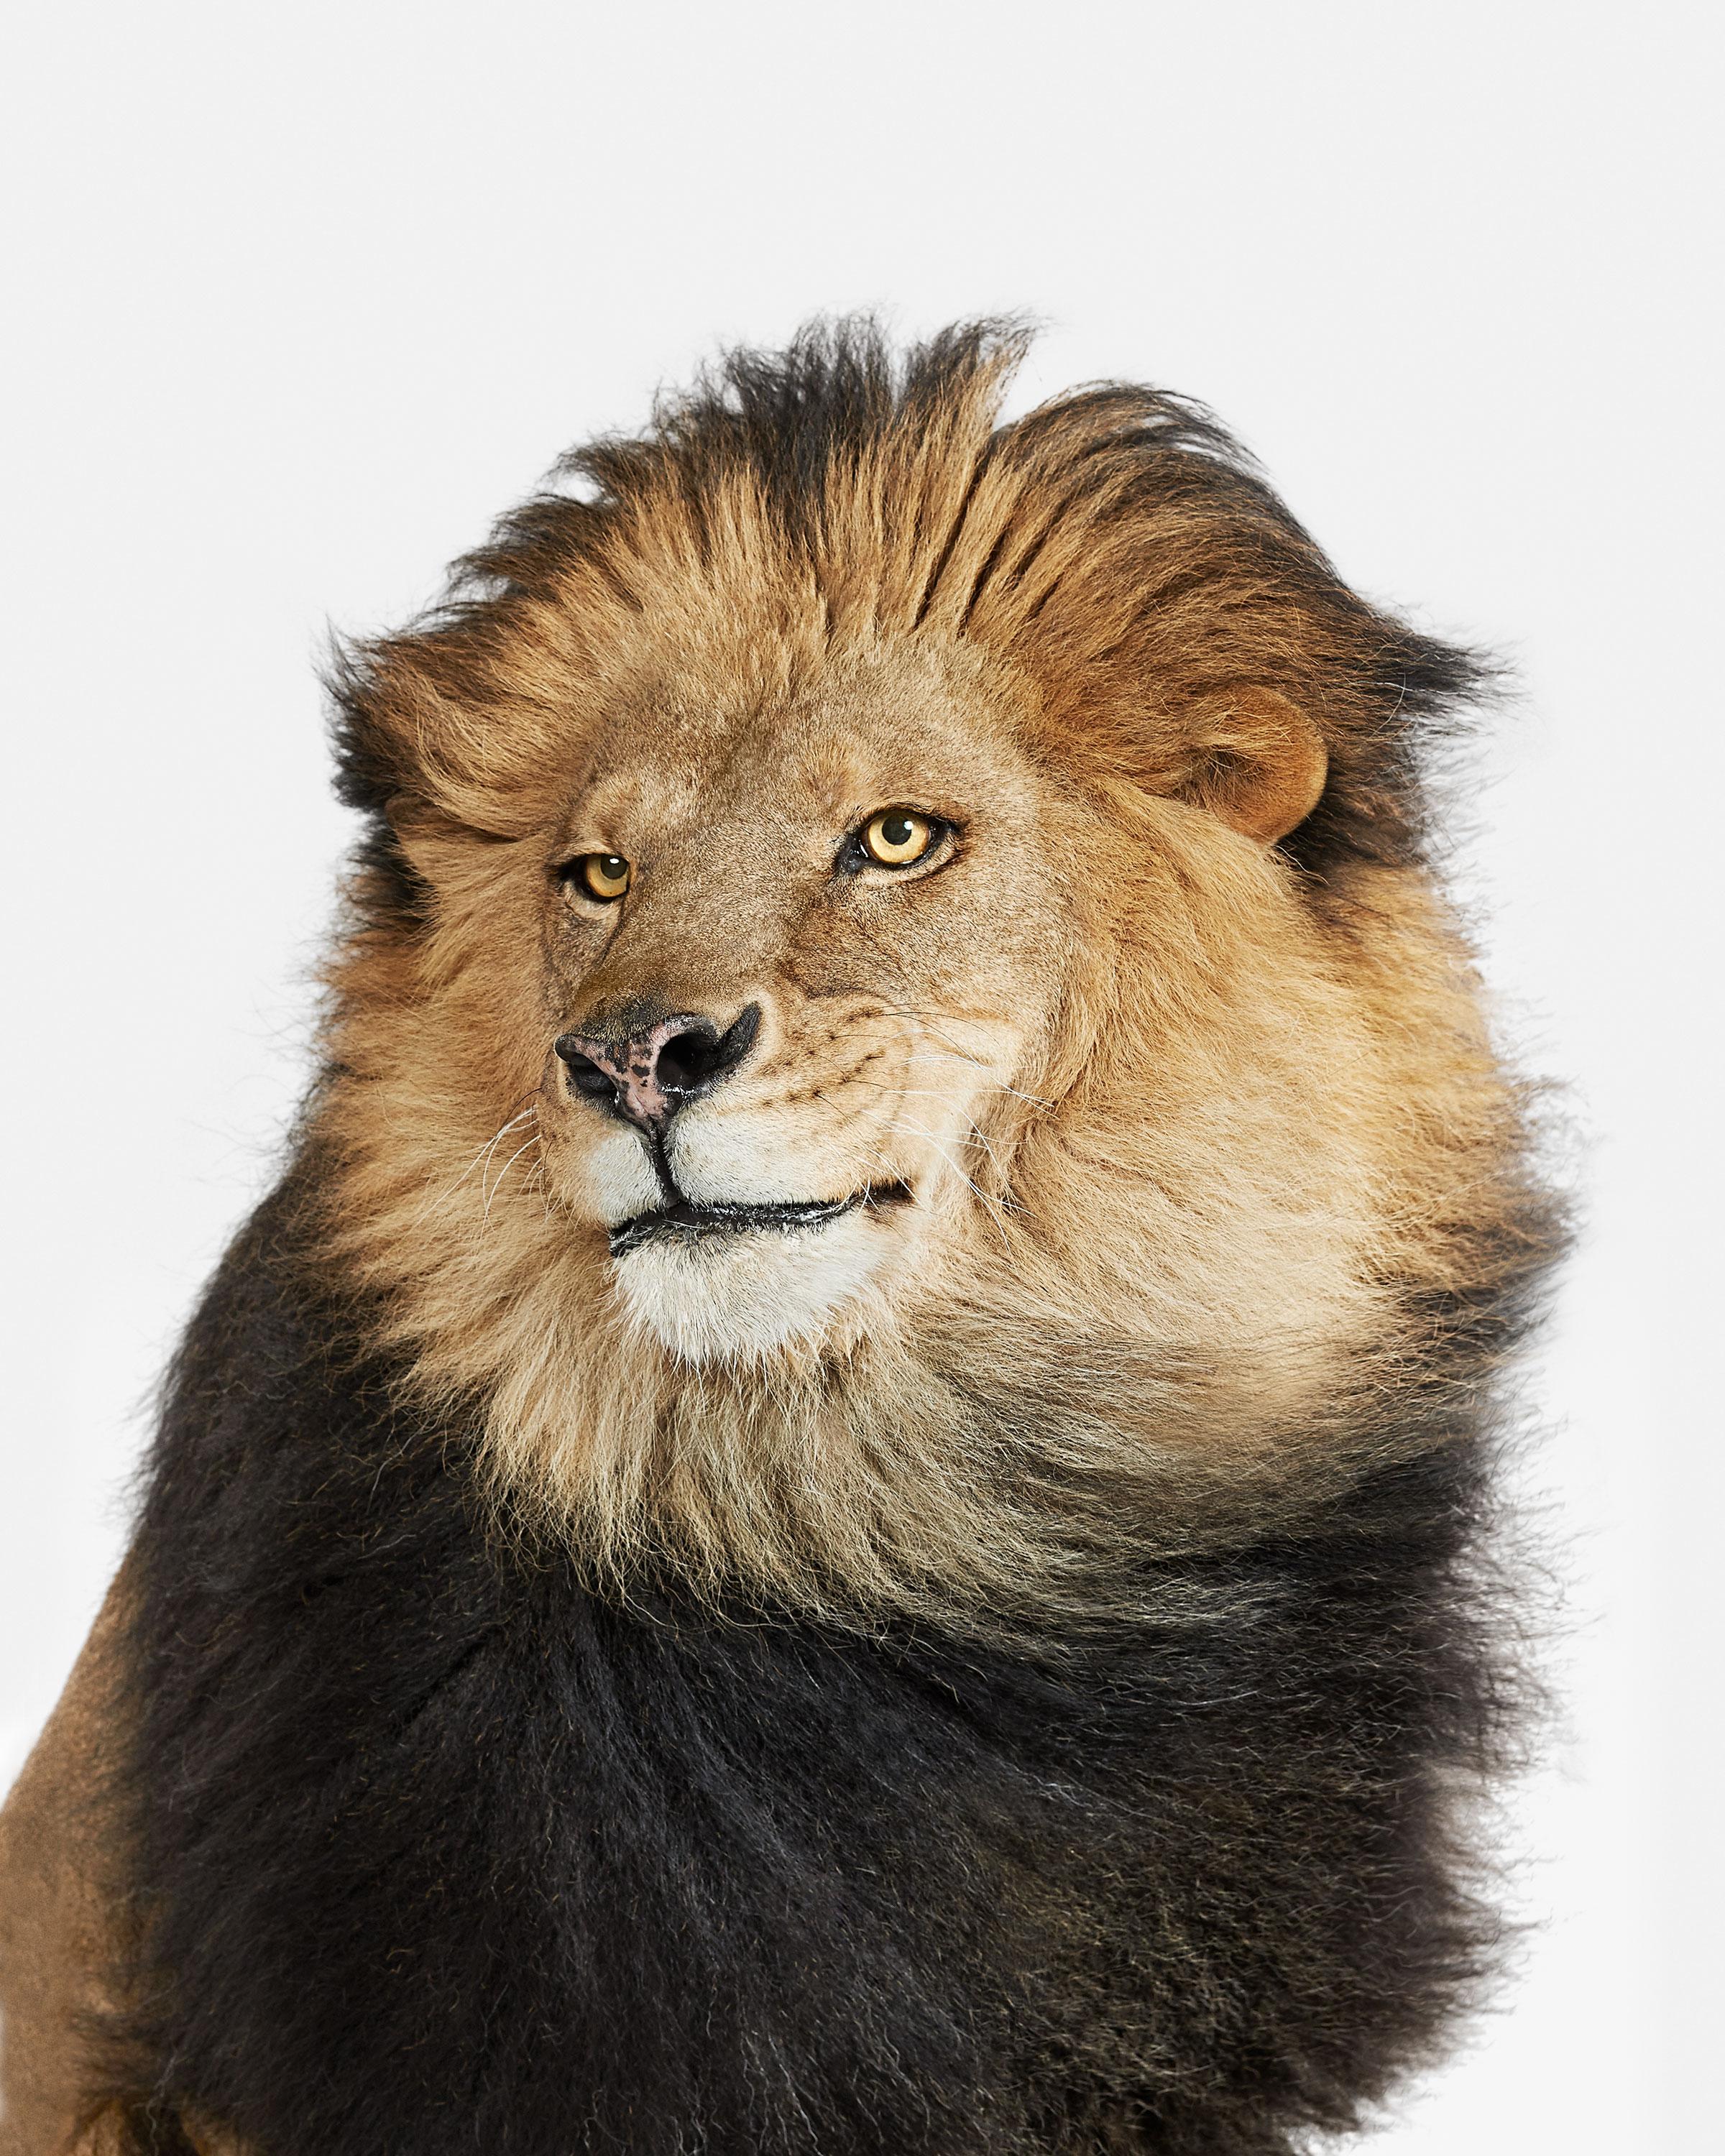 Randal Ford - Lion No. 2, Photography 2018, Printed After